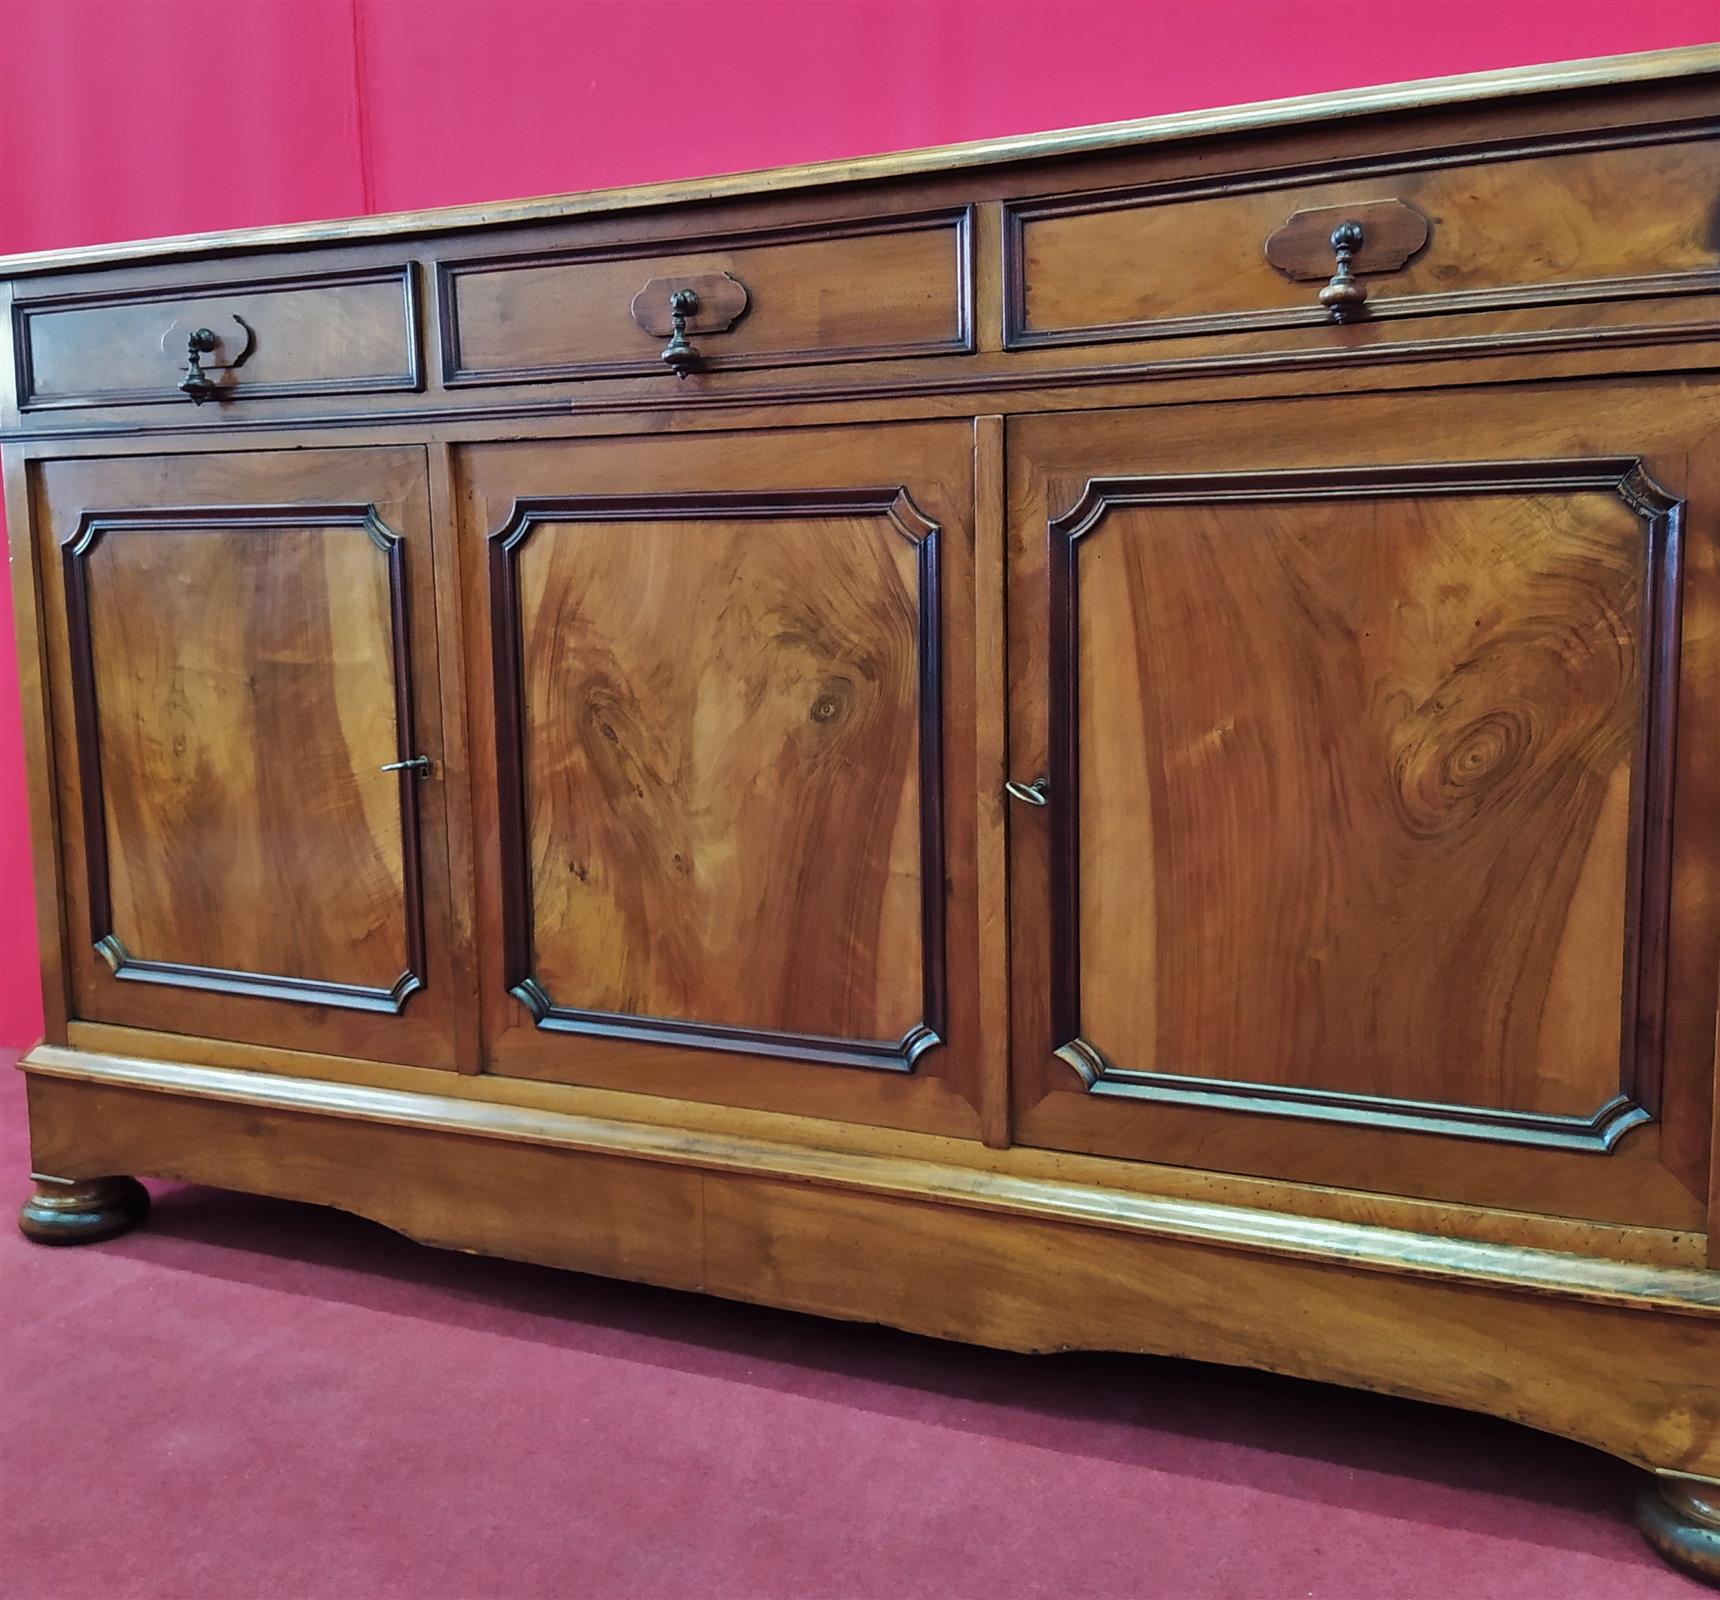 Sideboard with three doors and three drawers, in light Mahogany